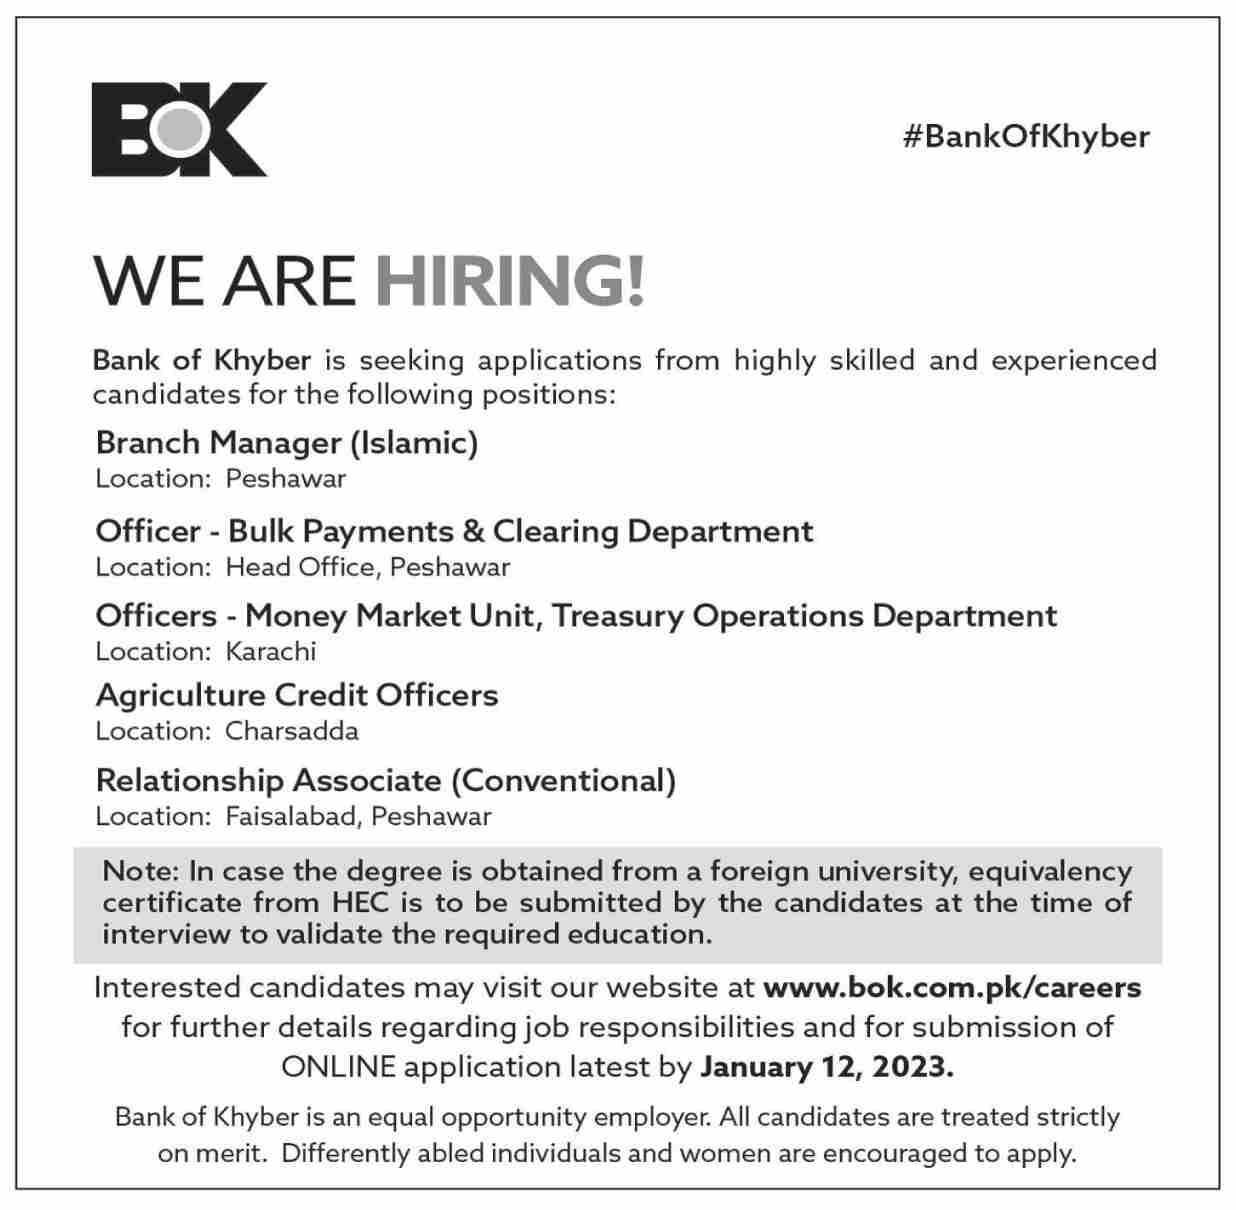 BOK Jobs 2023 | The Bank of Khyber Headquarters Announced Latest Recruitments